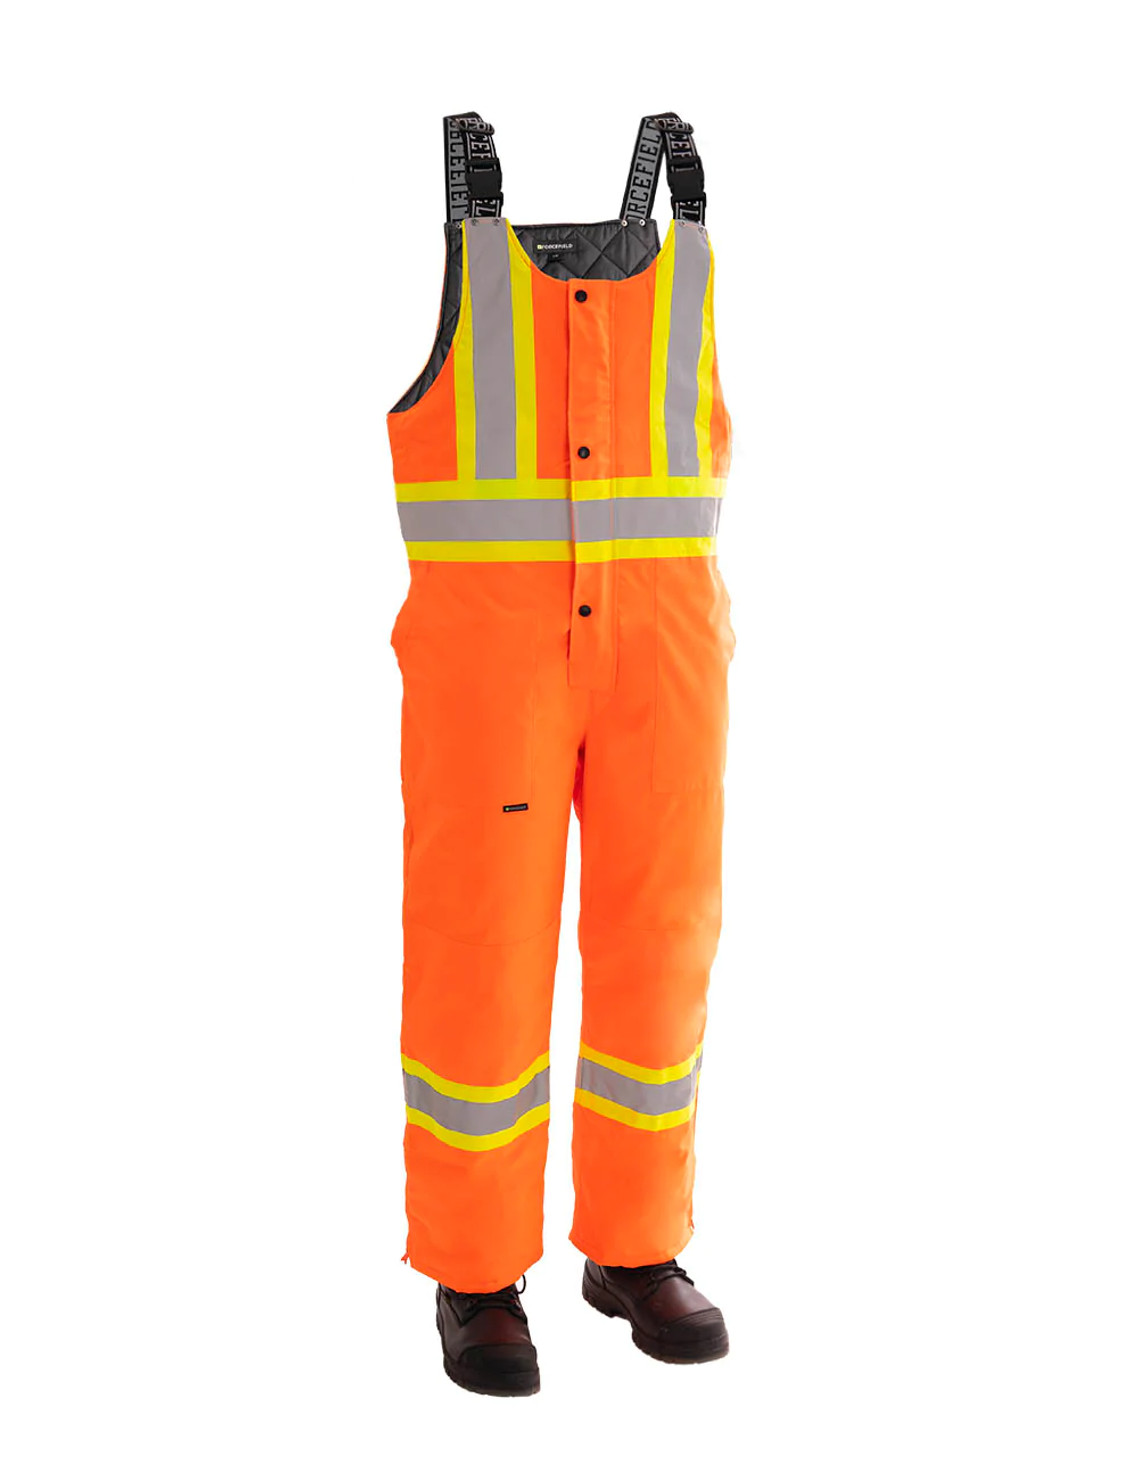 ForceField Deluxe Safety Bib Overall | Orange